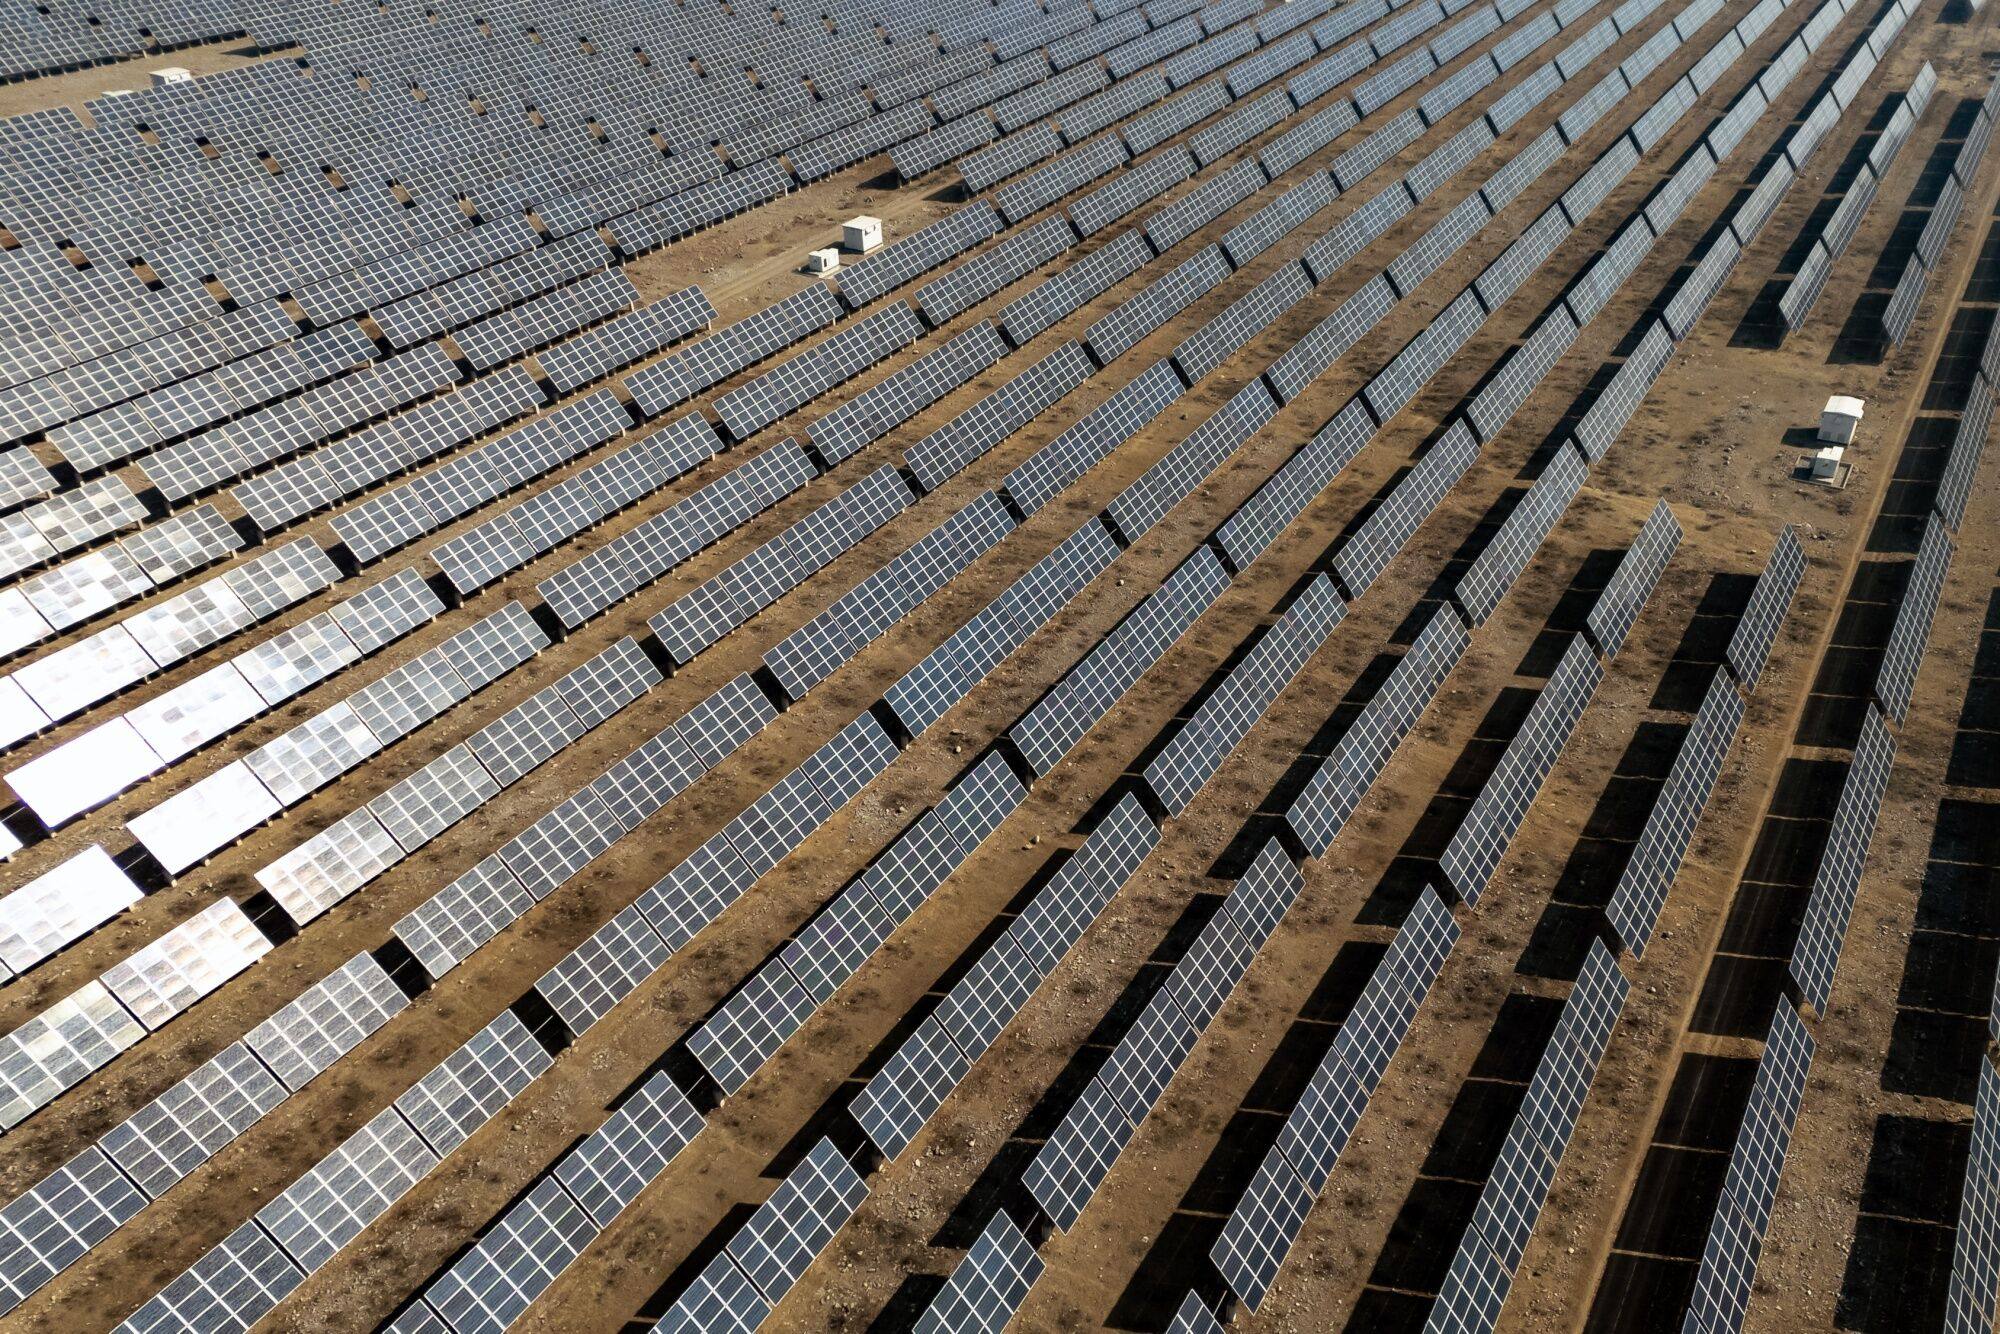 China has engaged in a world-leading buildout of renewable energy, but now faces tough trade restrictions as a result of industry overcapacity. 
Photo: Bloomberg